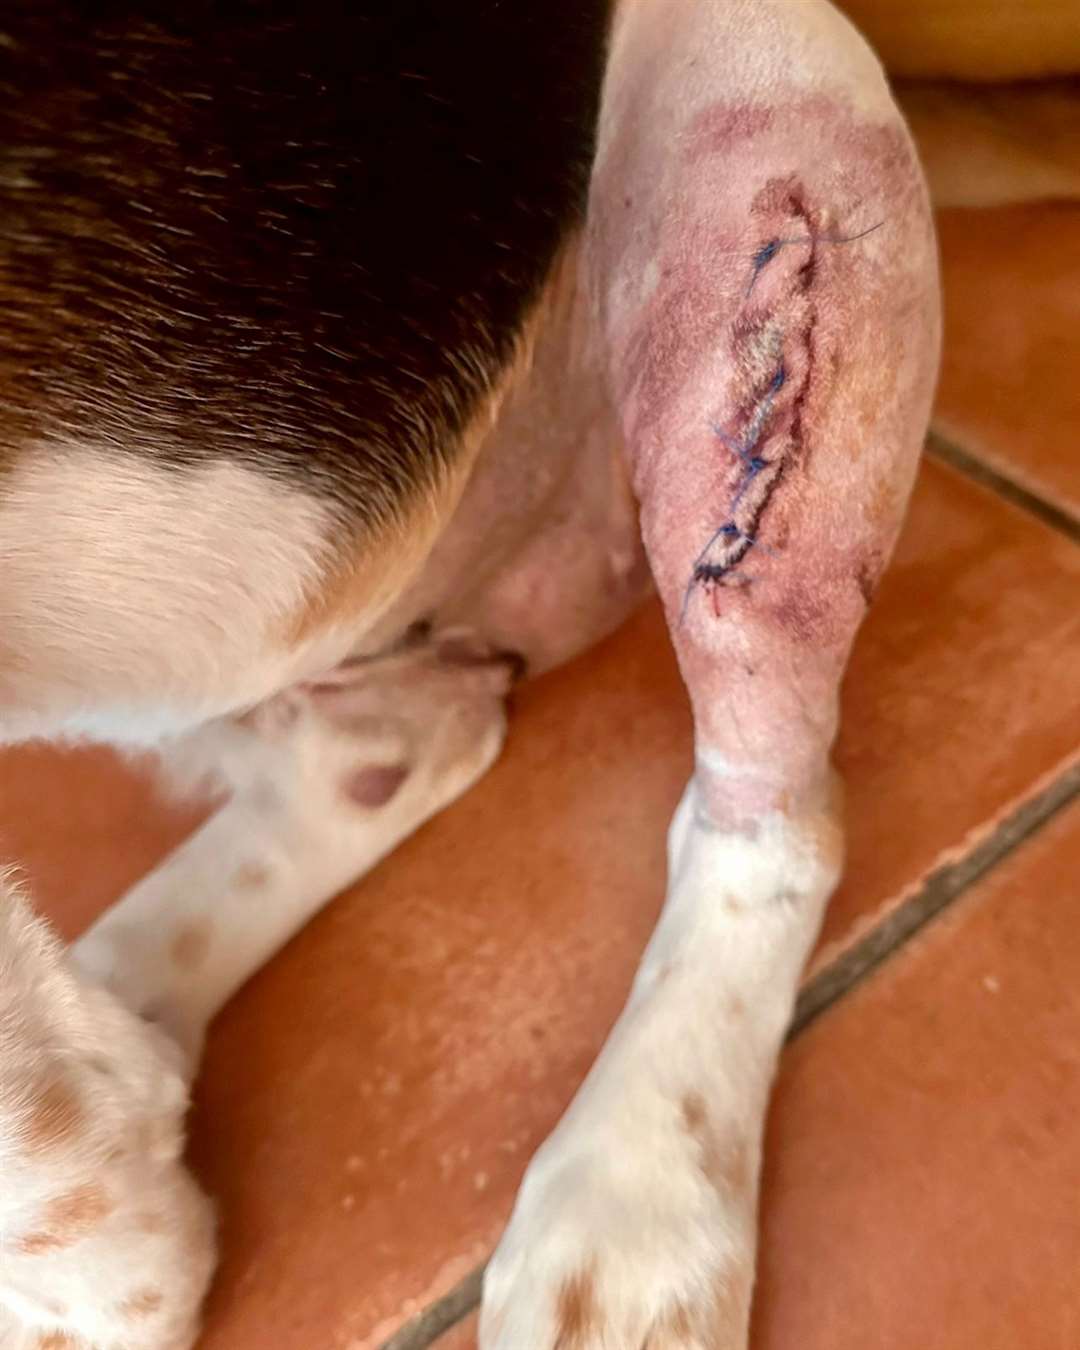 Flash the Beagle's leg stitched up. Picture: SWNS